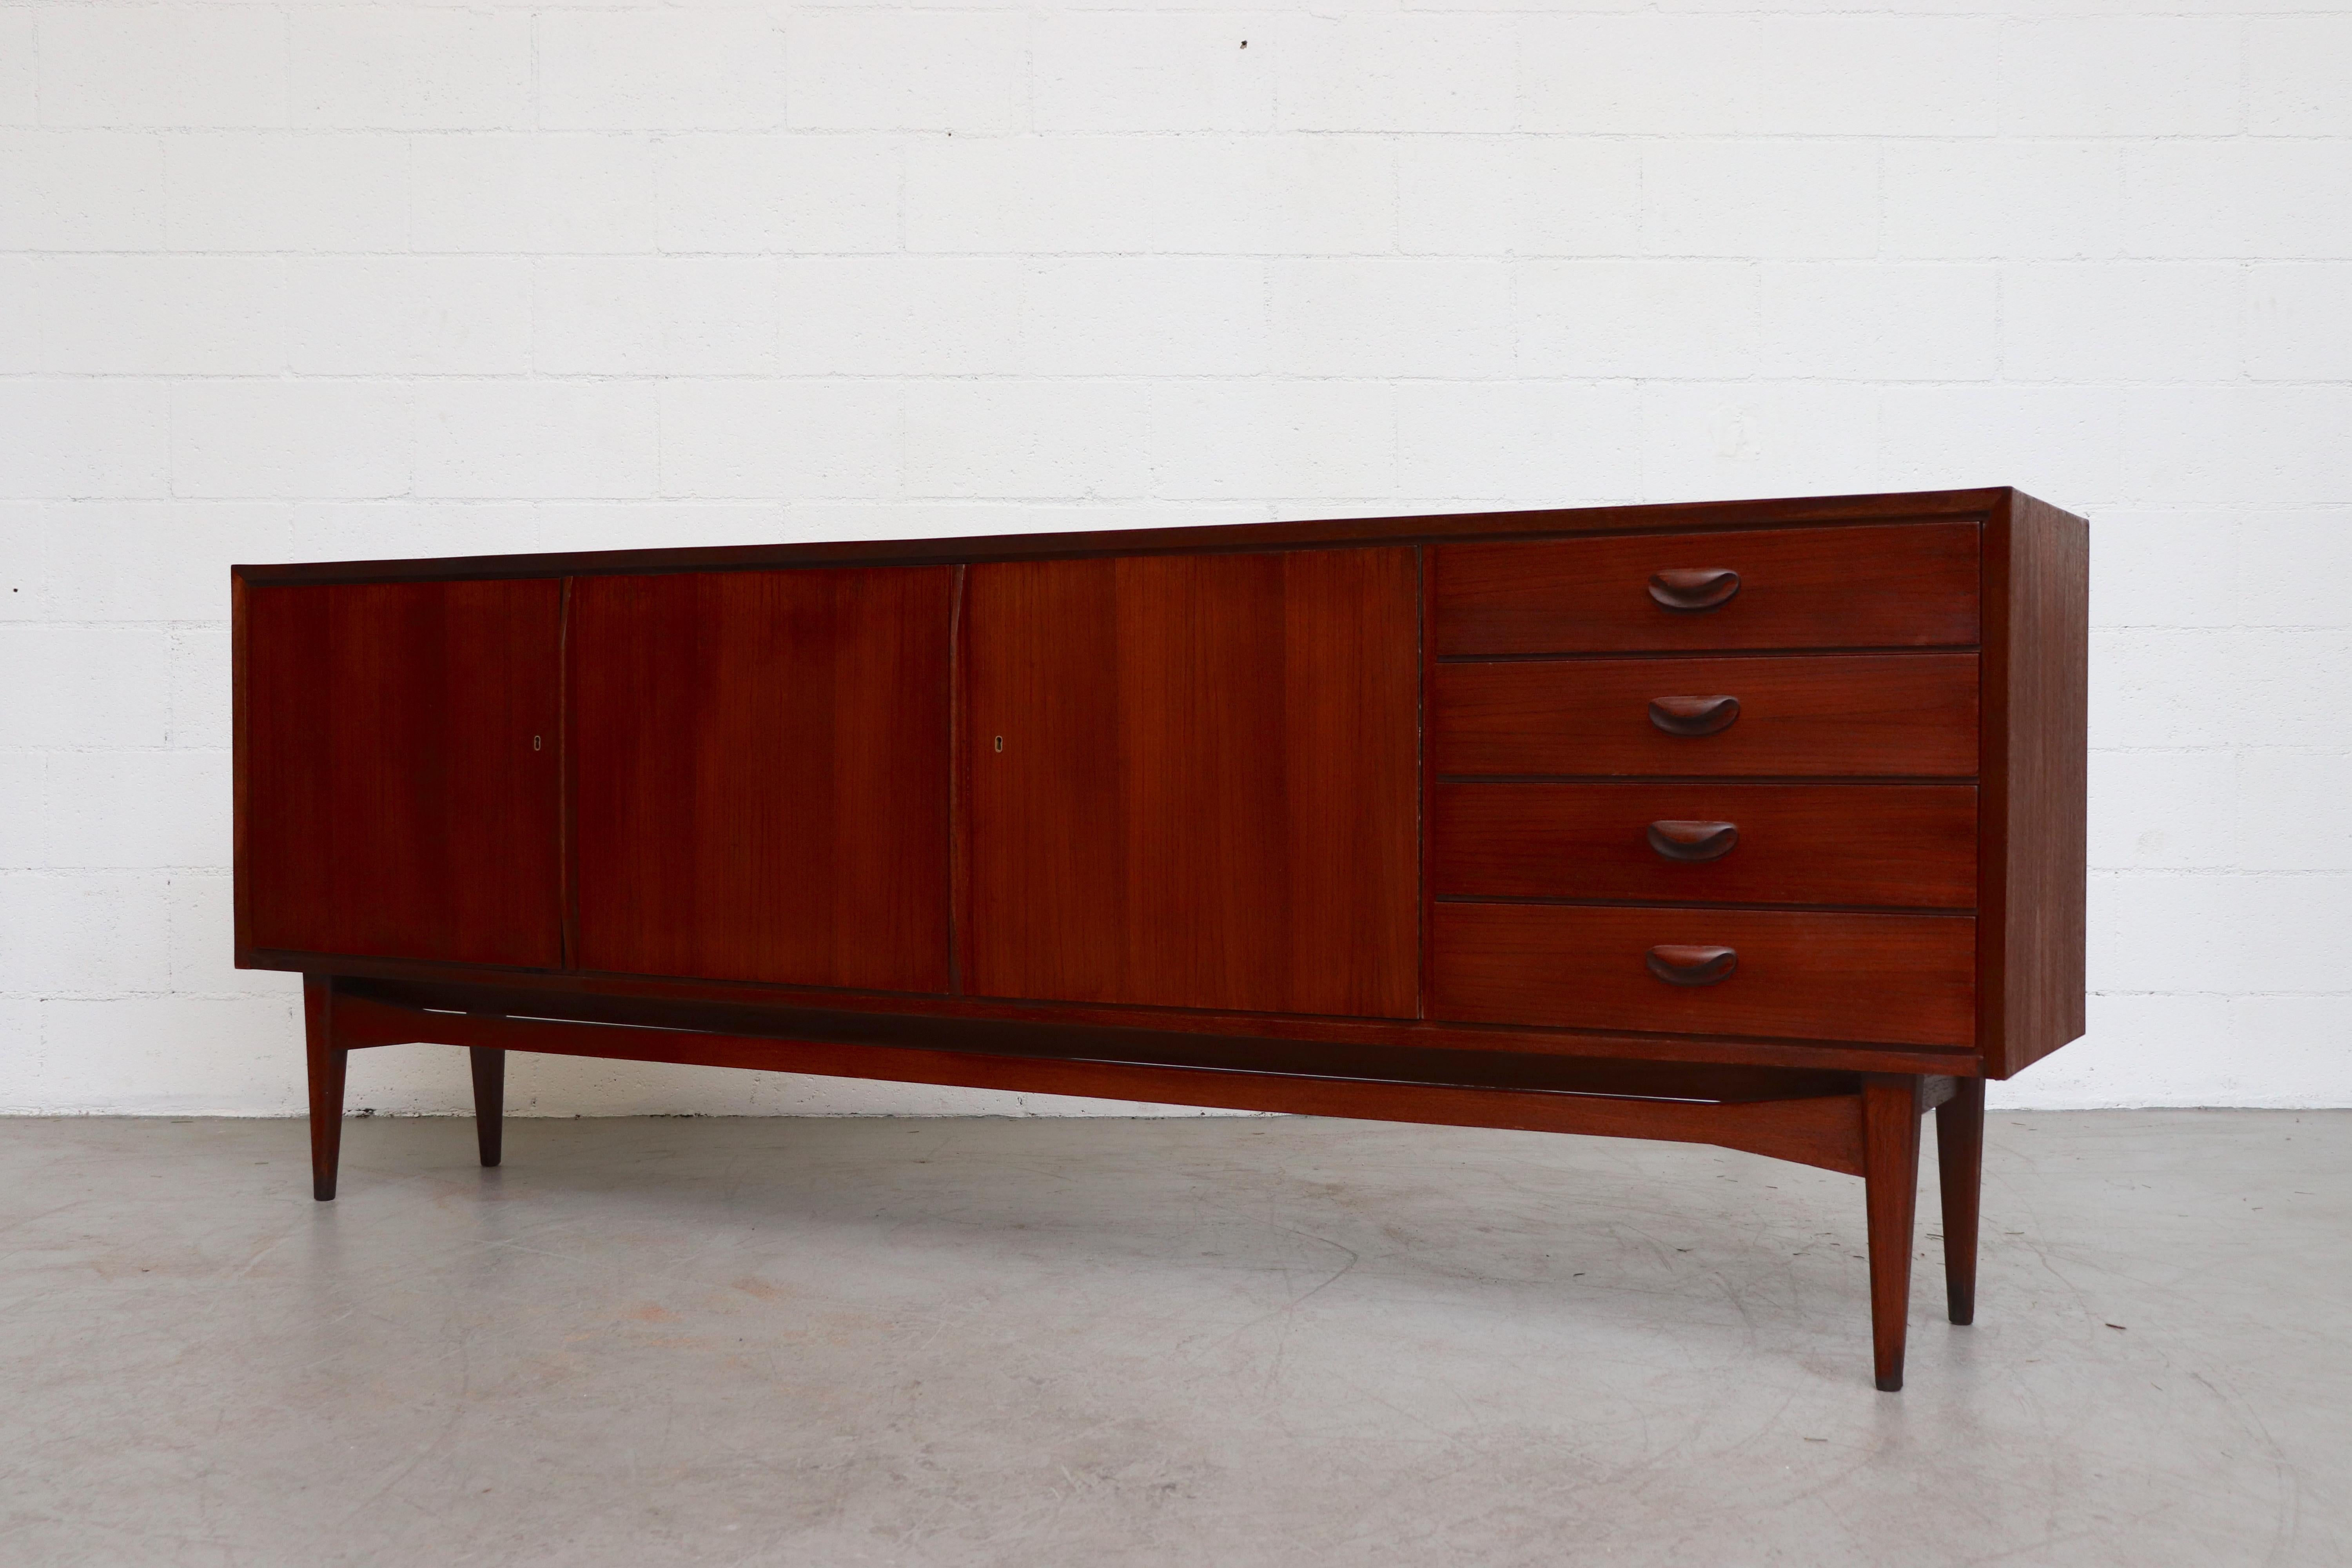 Midcentury teak credenza. Handsome warm toned teak with three large cubbies and four drawers with organically carved drawer pulls. In good original condition with some visible signs of wear consistent with age and use.